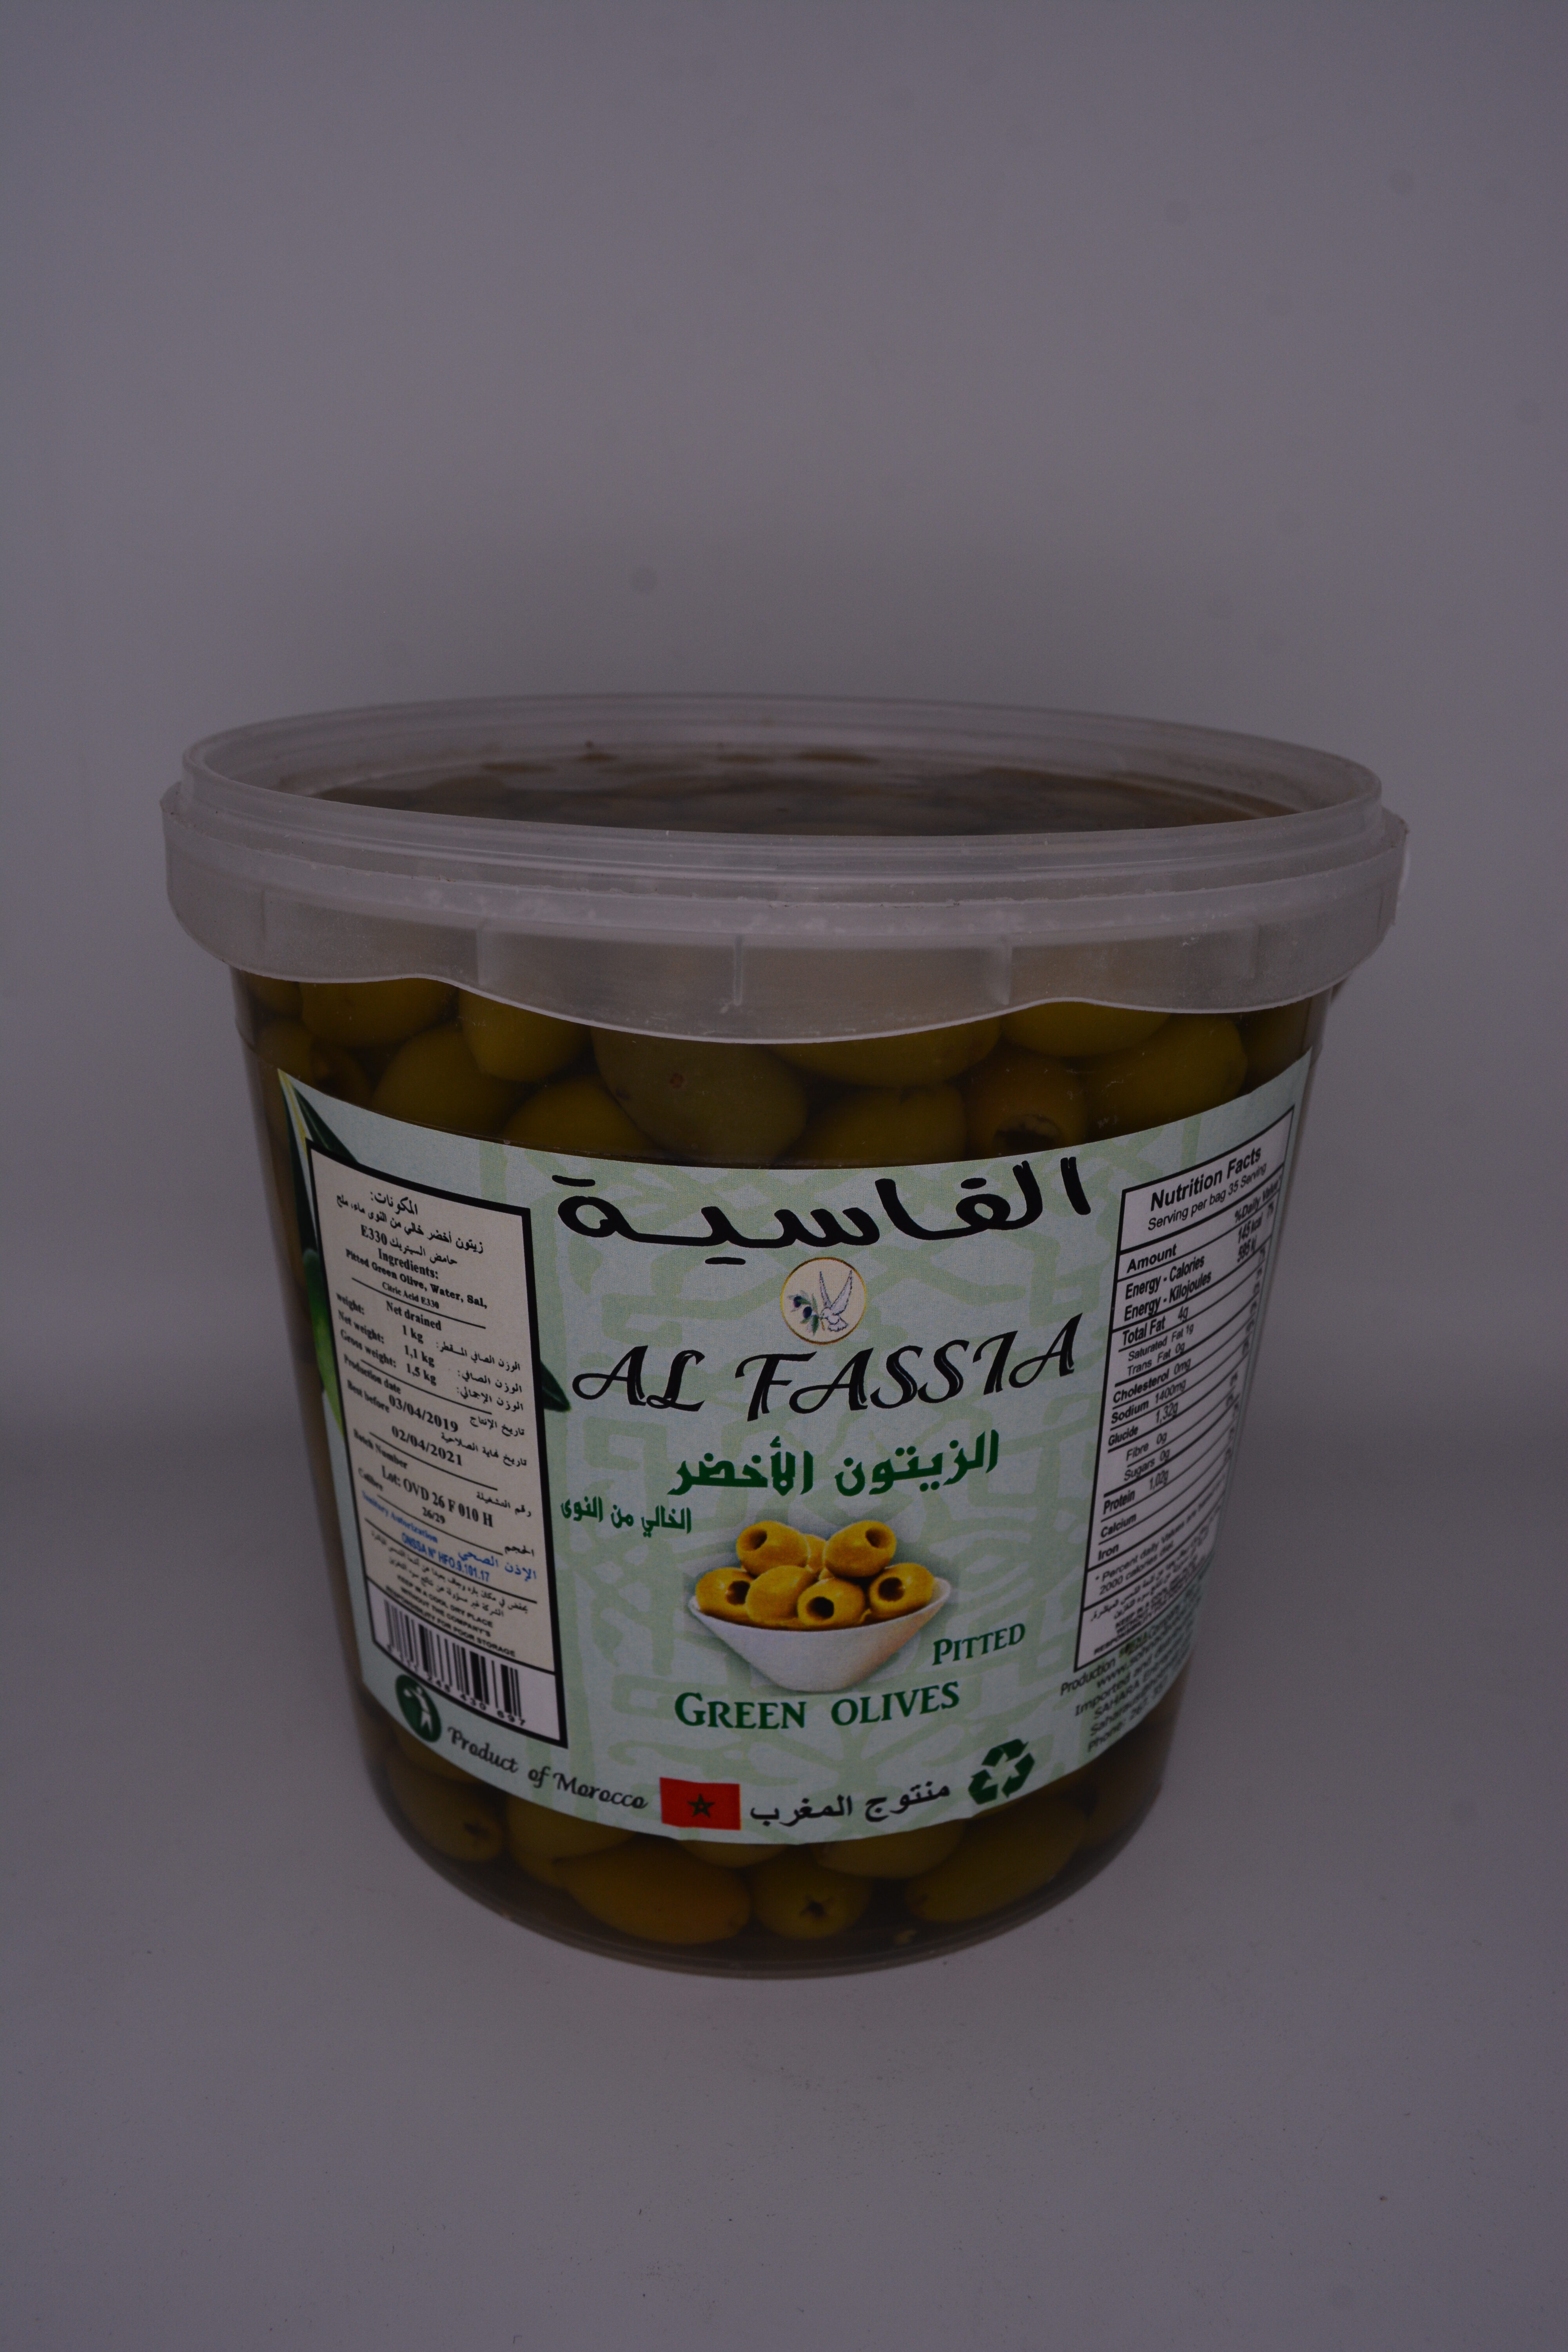 AL FASSIA PITTED GREEN OLIVES - Product